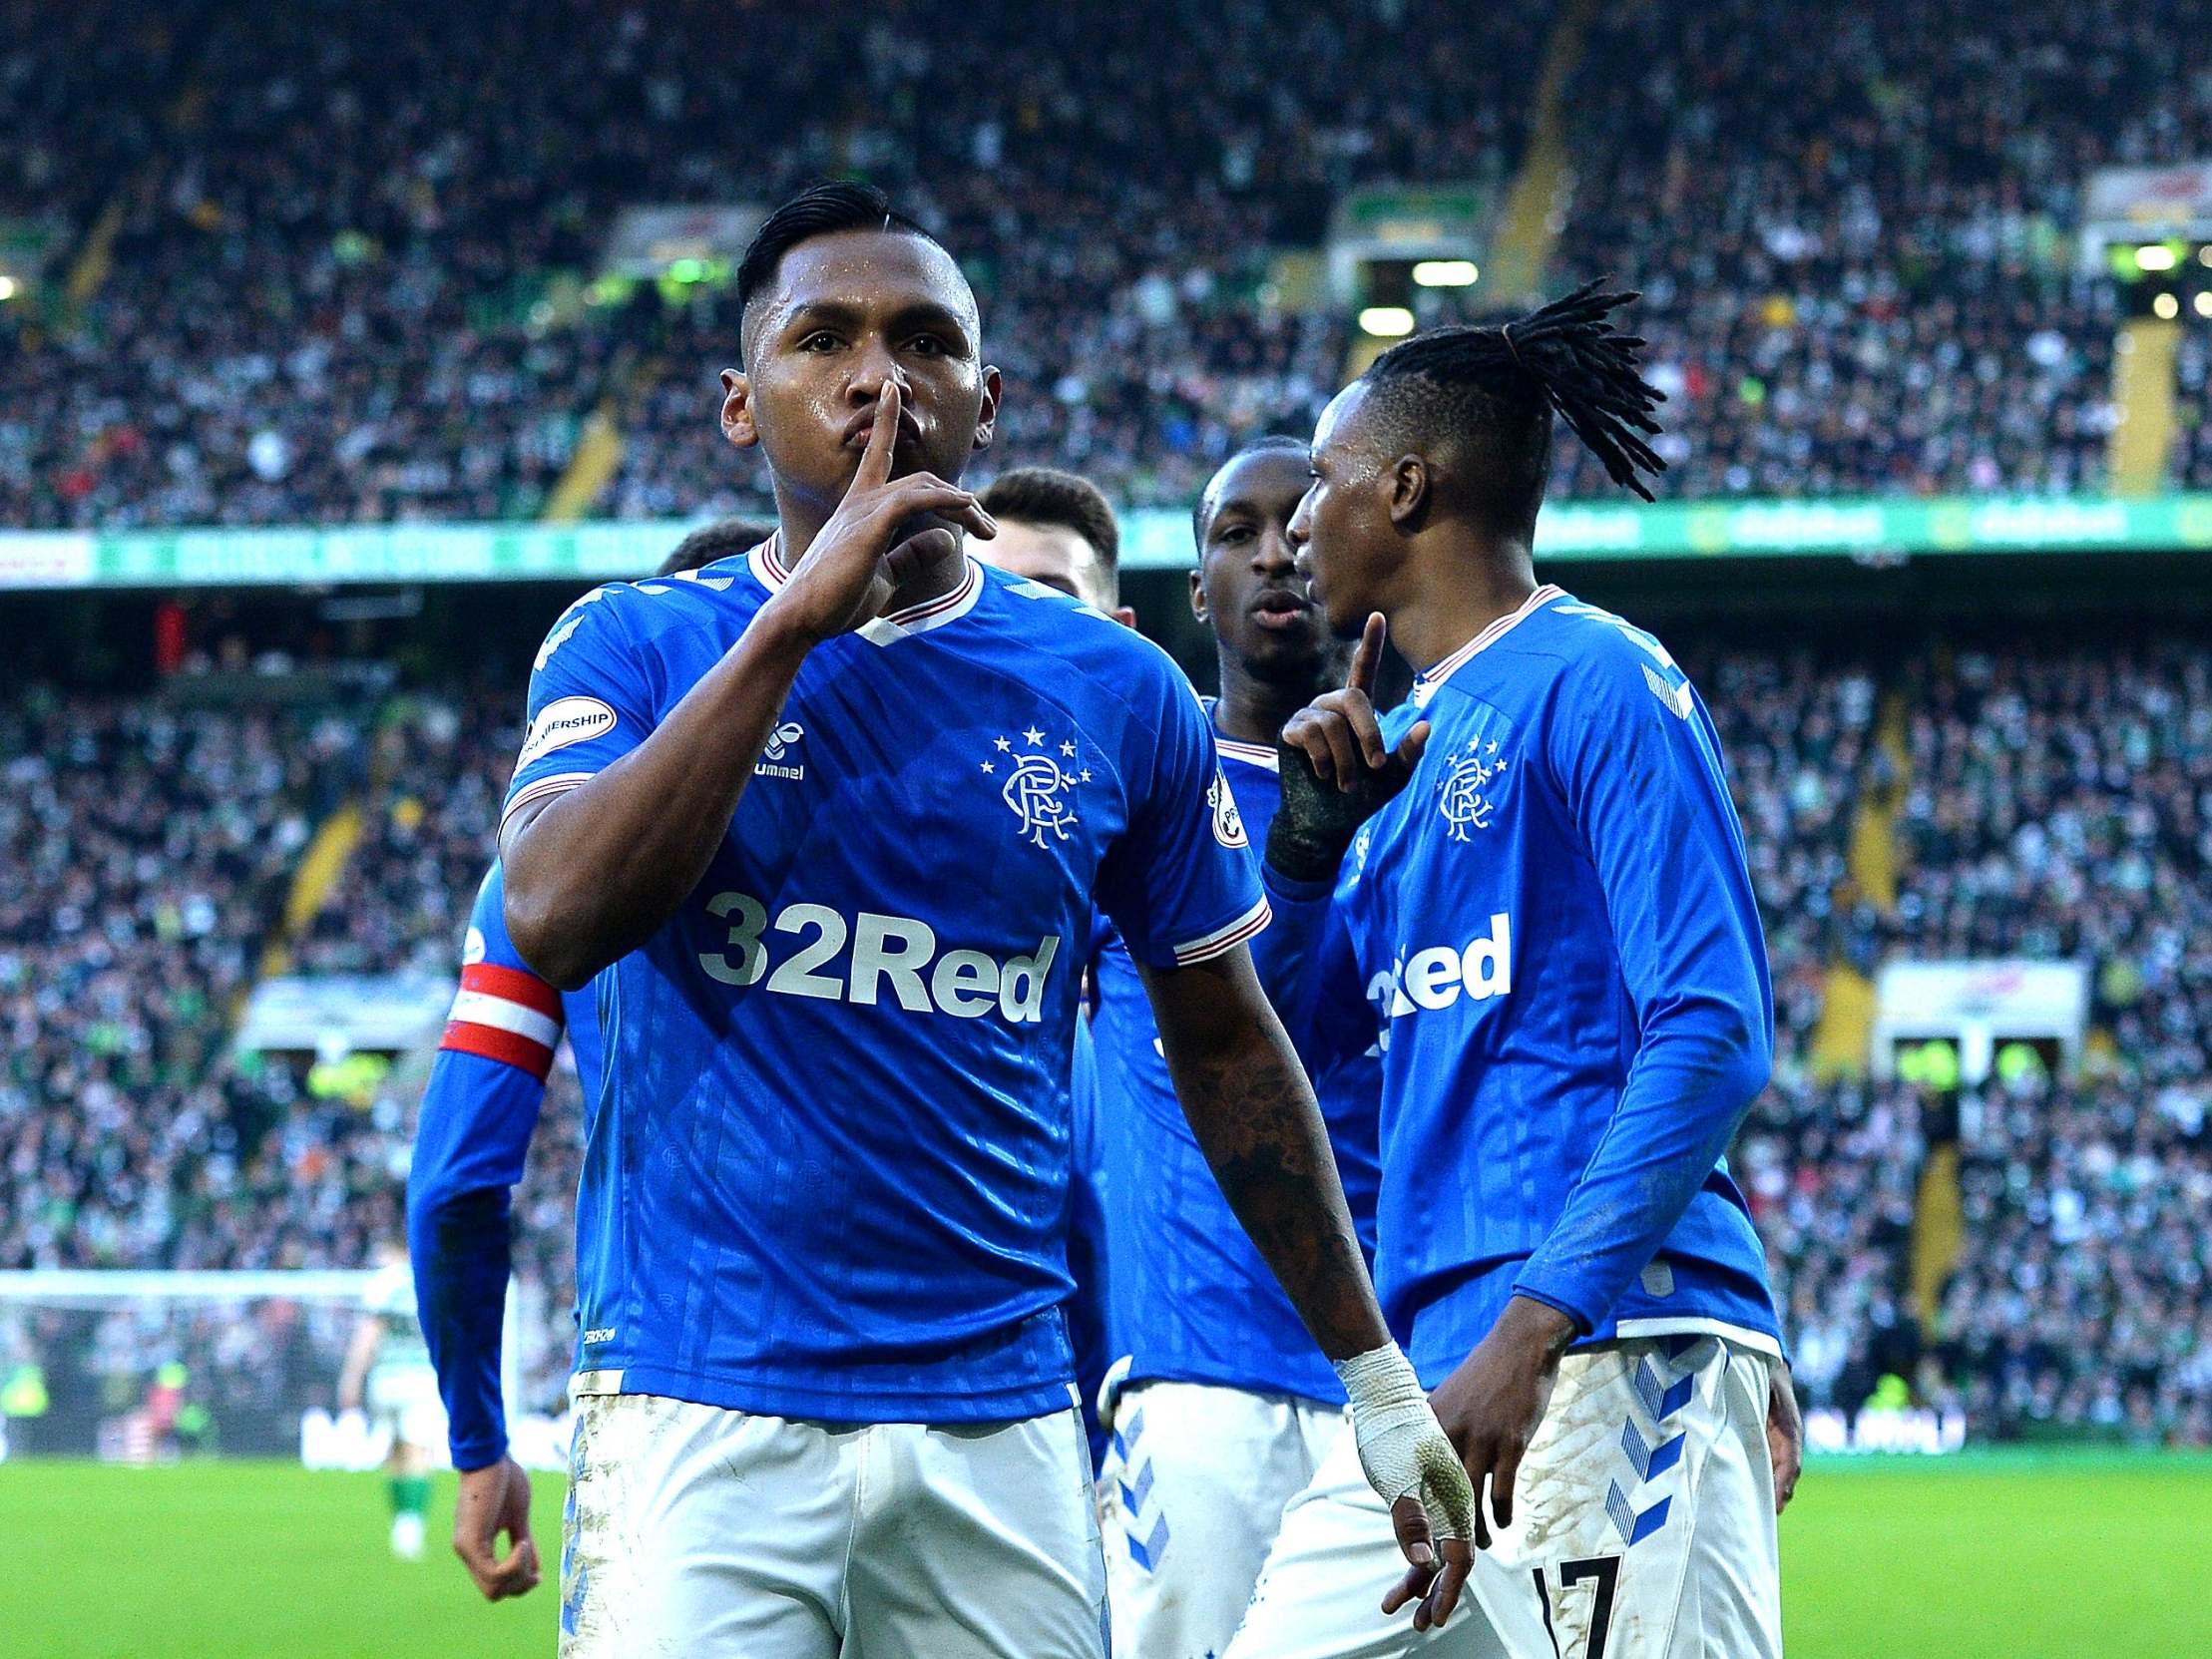 Morelos has been hugely important to Rangers